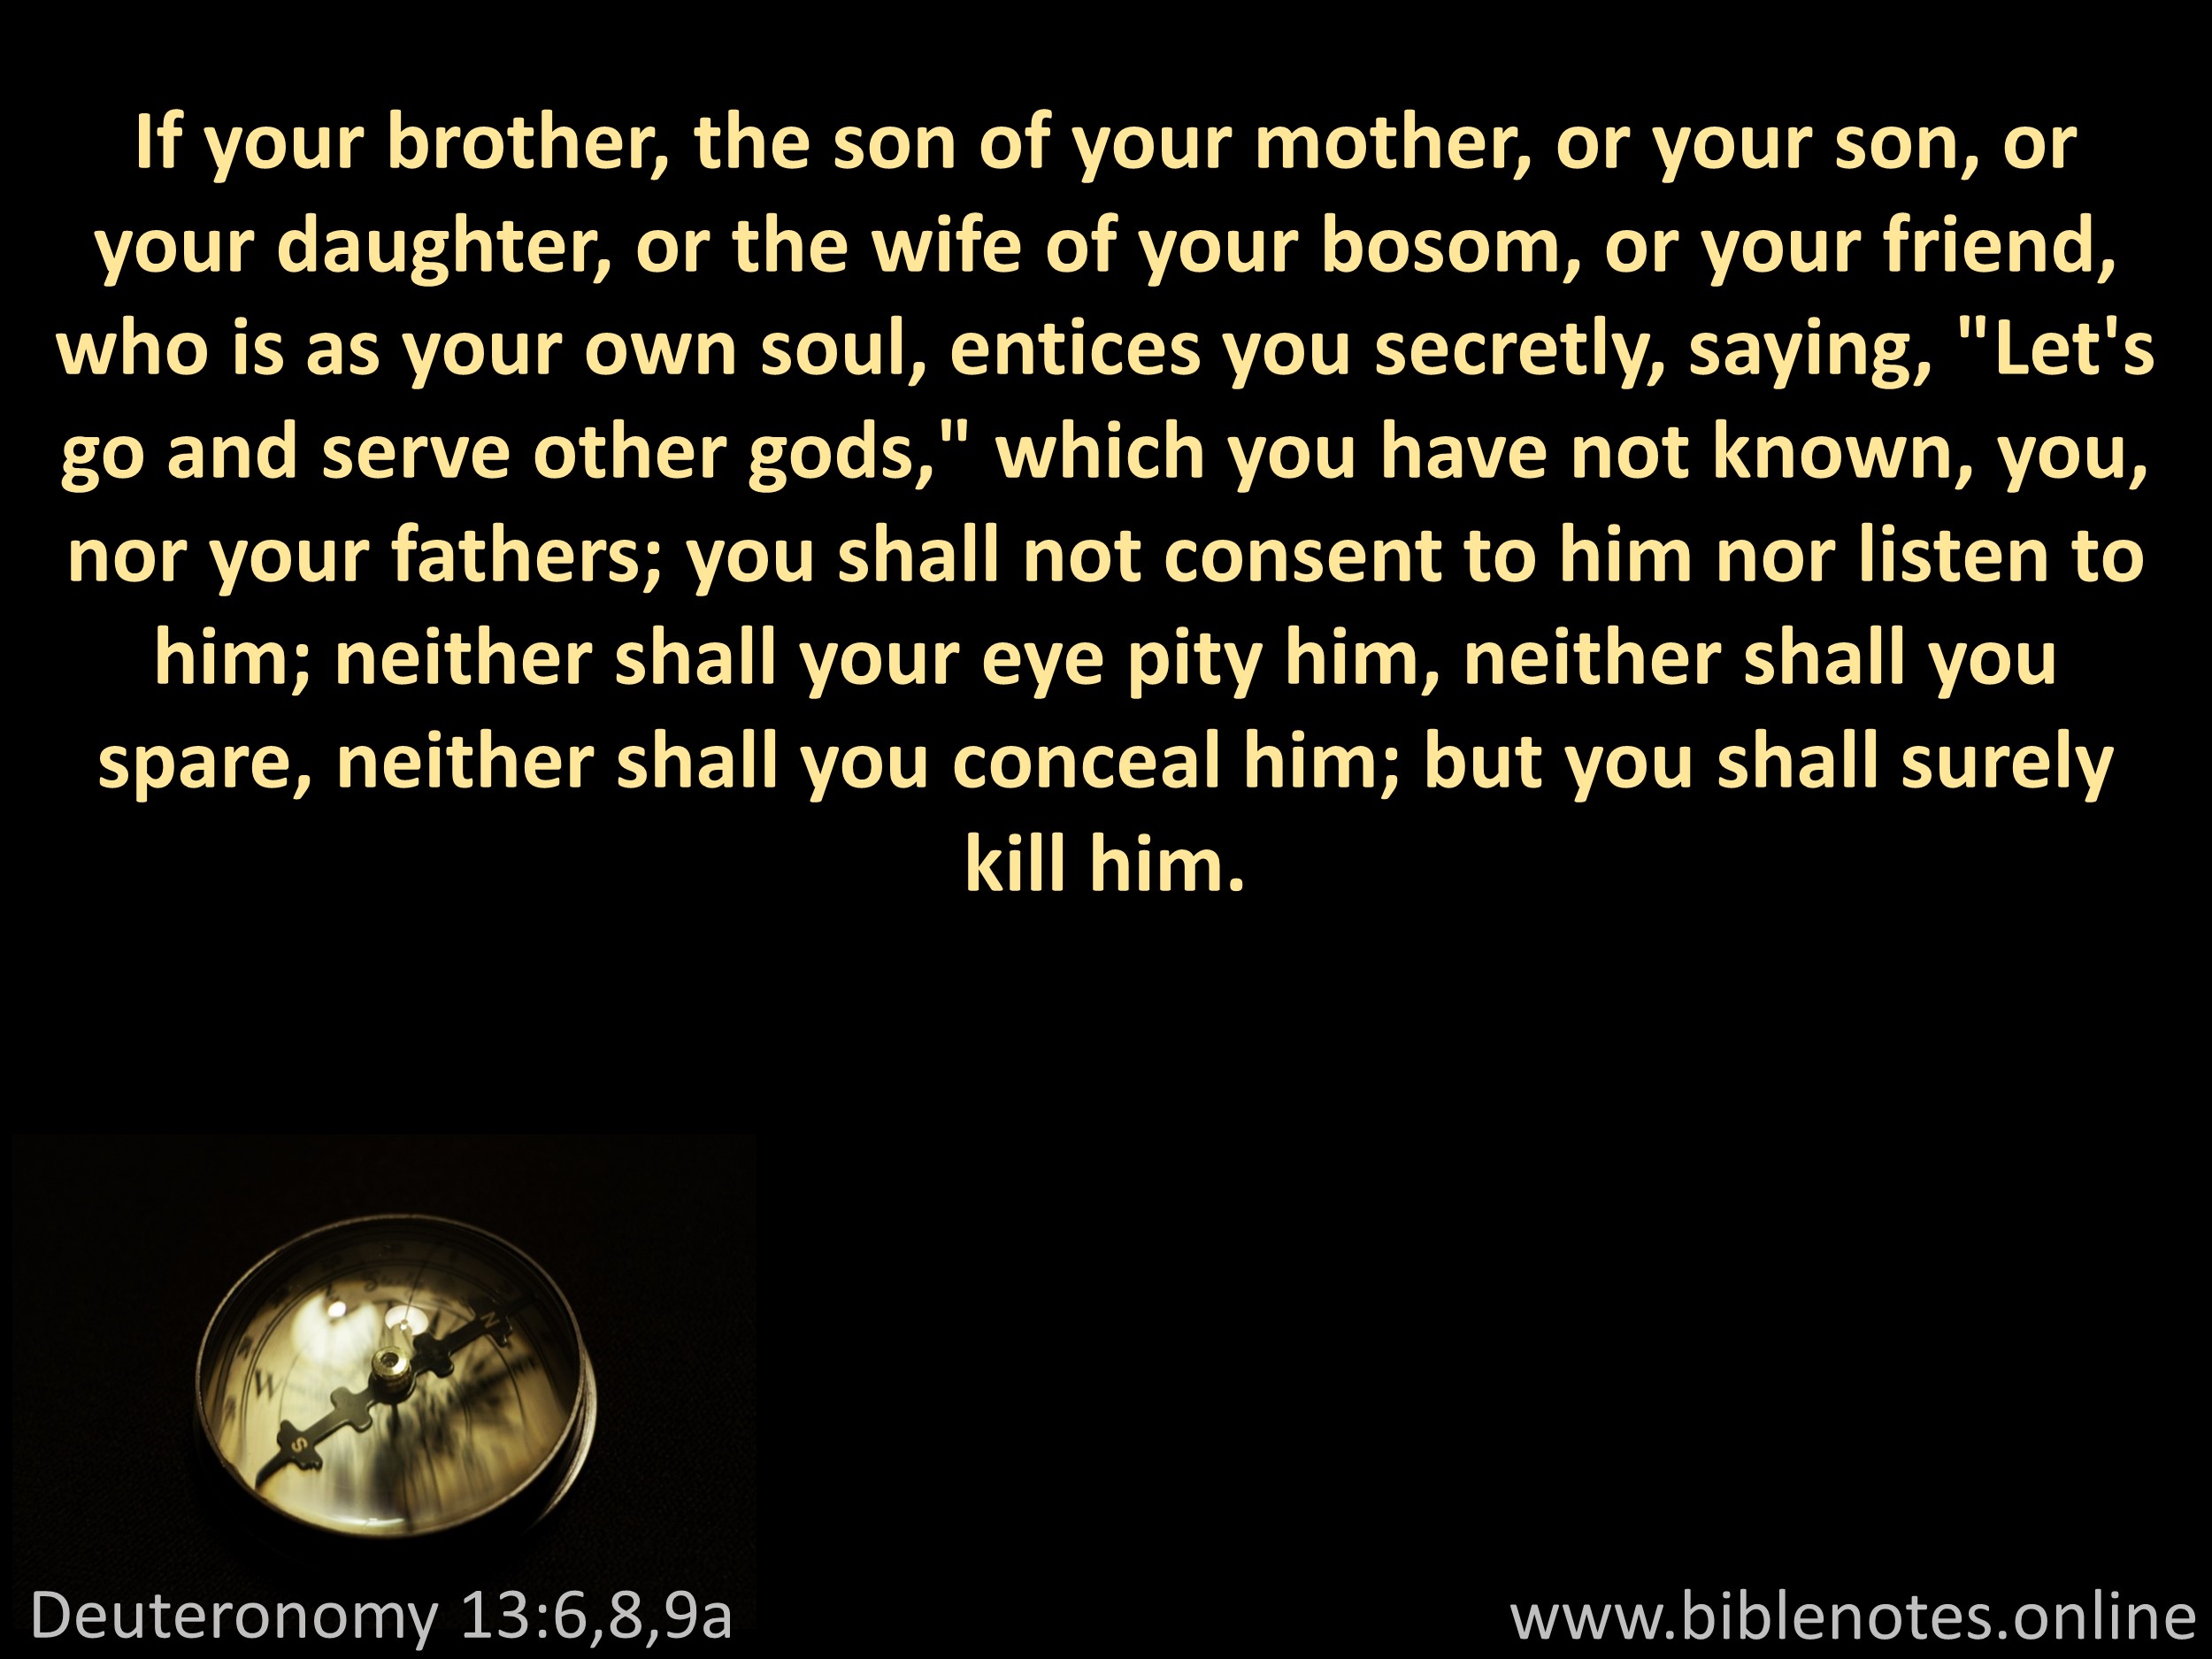 Bible Verse from Deuteronomy Chapter 13